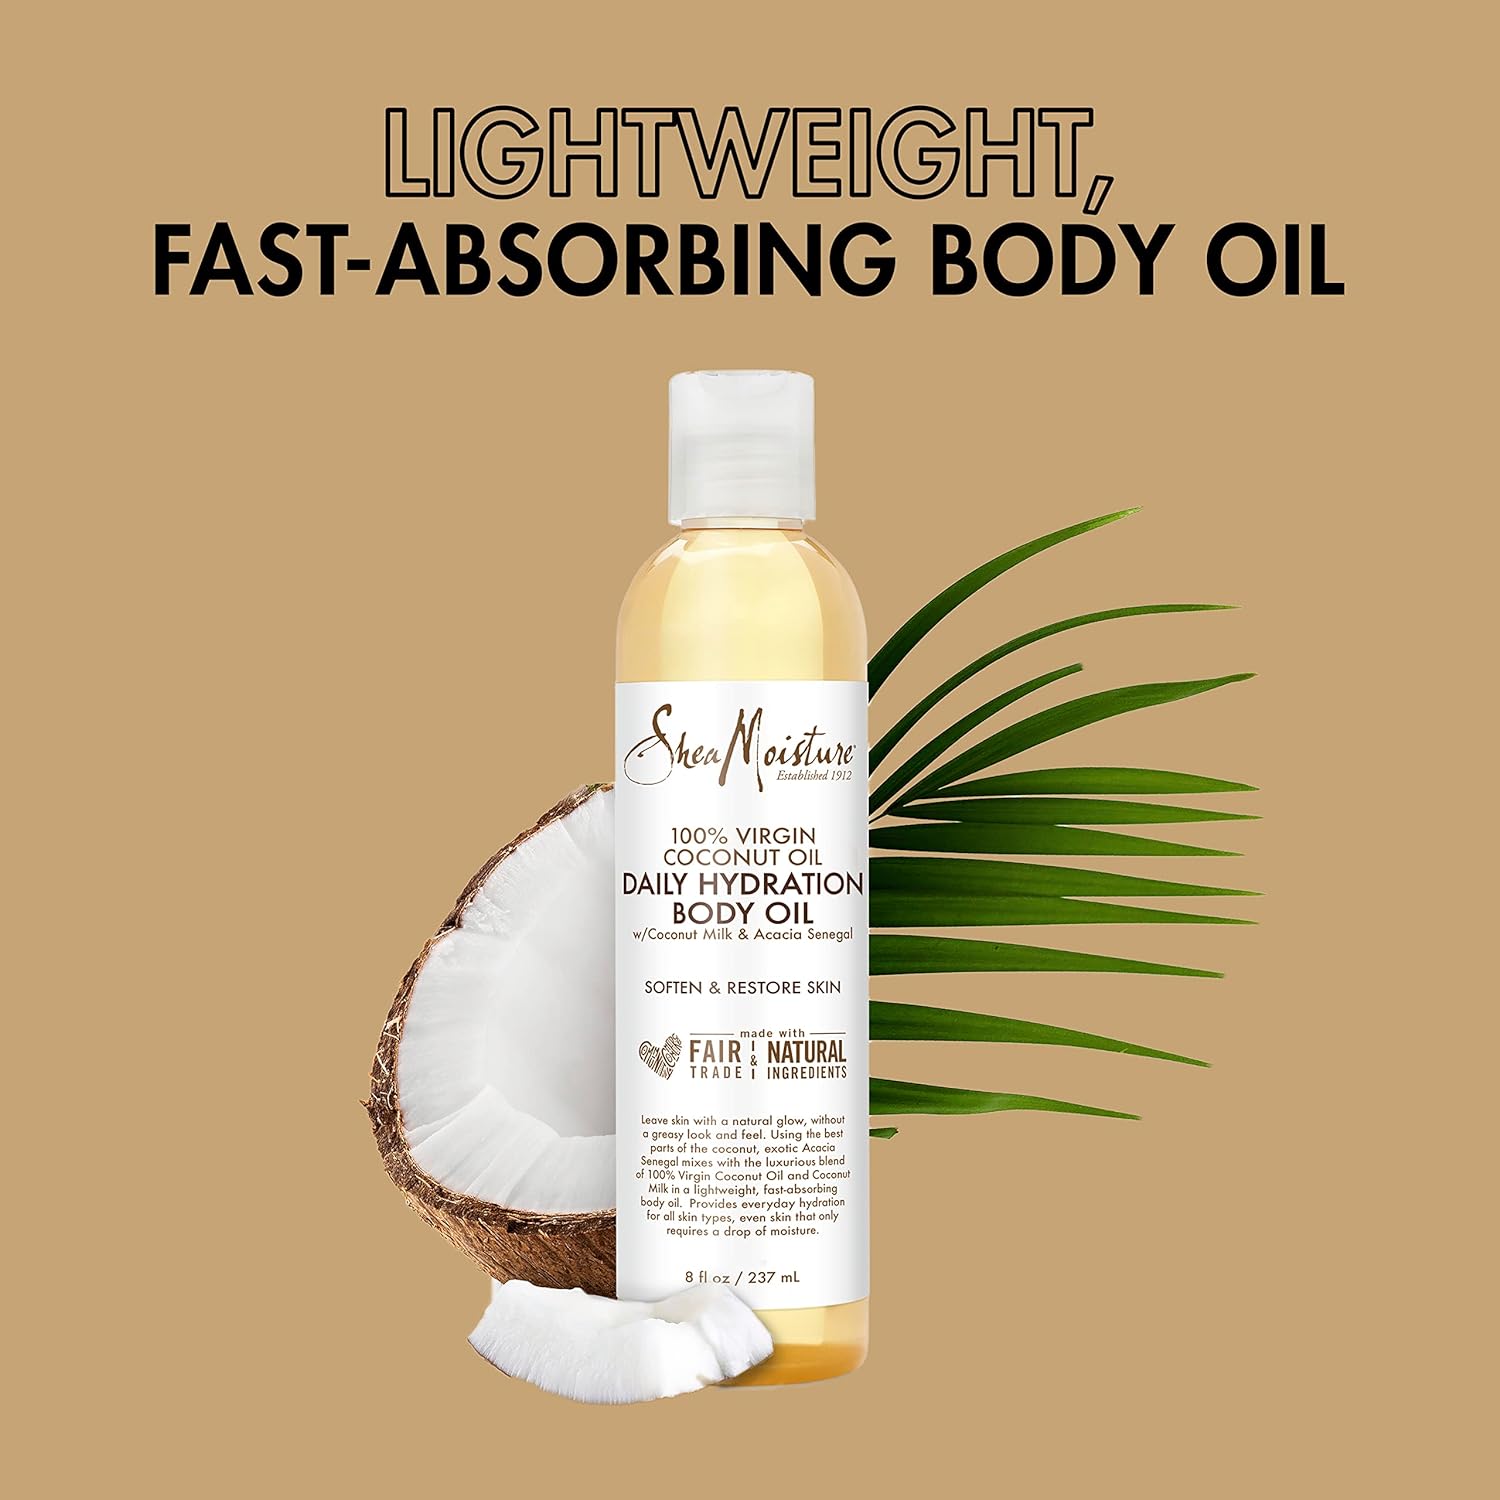 SheaMoisture Daily Hydration Body Oil Virgin Coconut Oil For Dry Skin Paraben Free 8 oz : Beauty & Personal Care